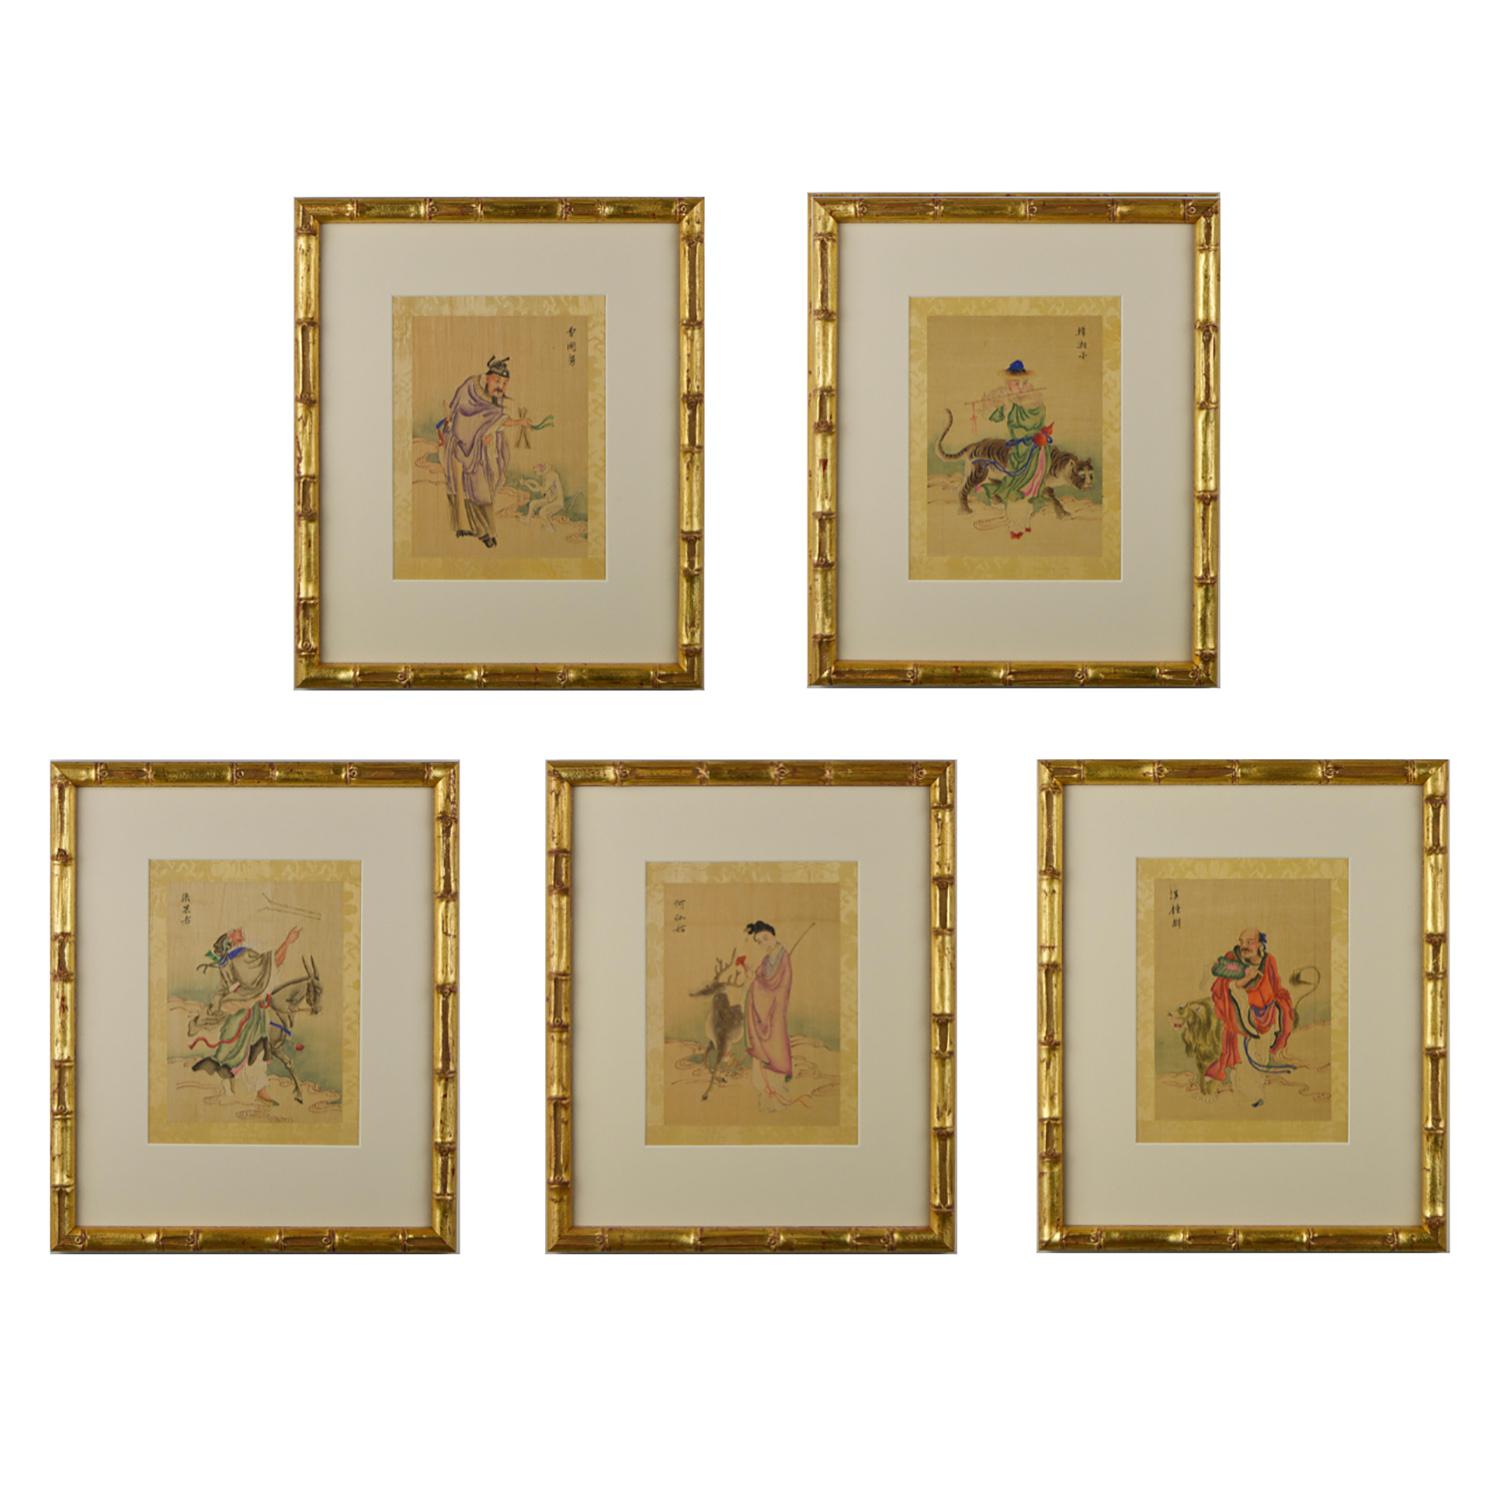 A charmimg set of watercolours circa 1920. Presented in bespoke gold bamboo frames behind UV70 glass which affords the pictures some protection and cuts reflection.